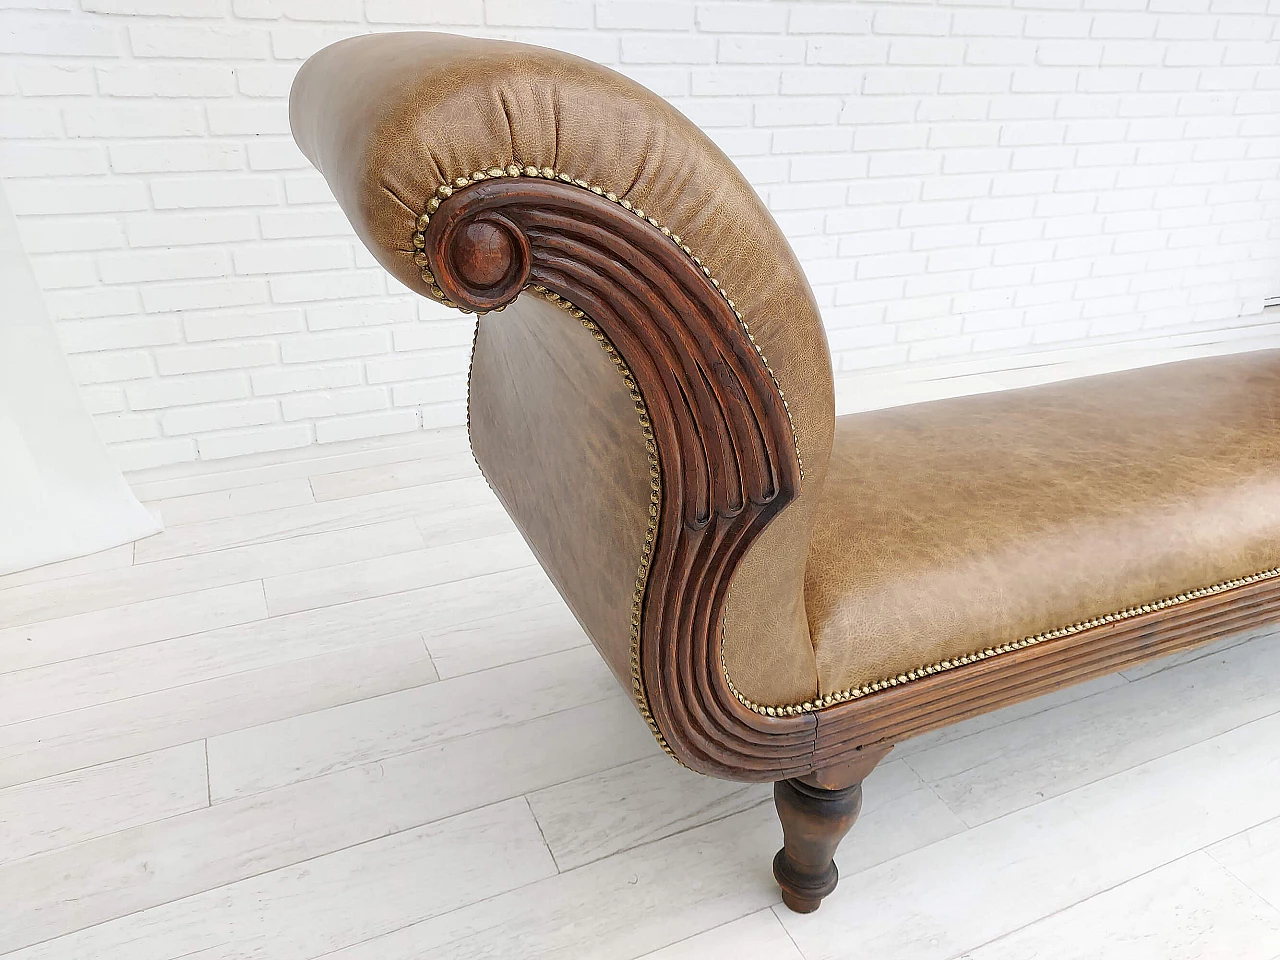 Danish antique chaise longue, early 20th century 1142171